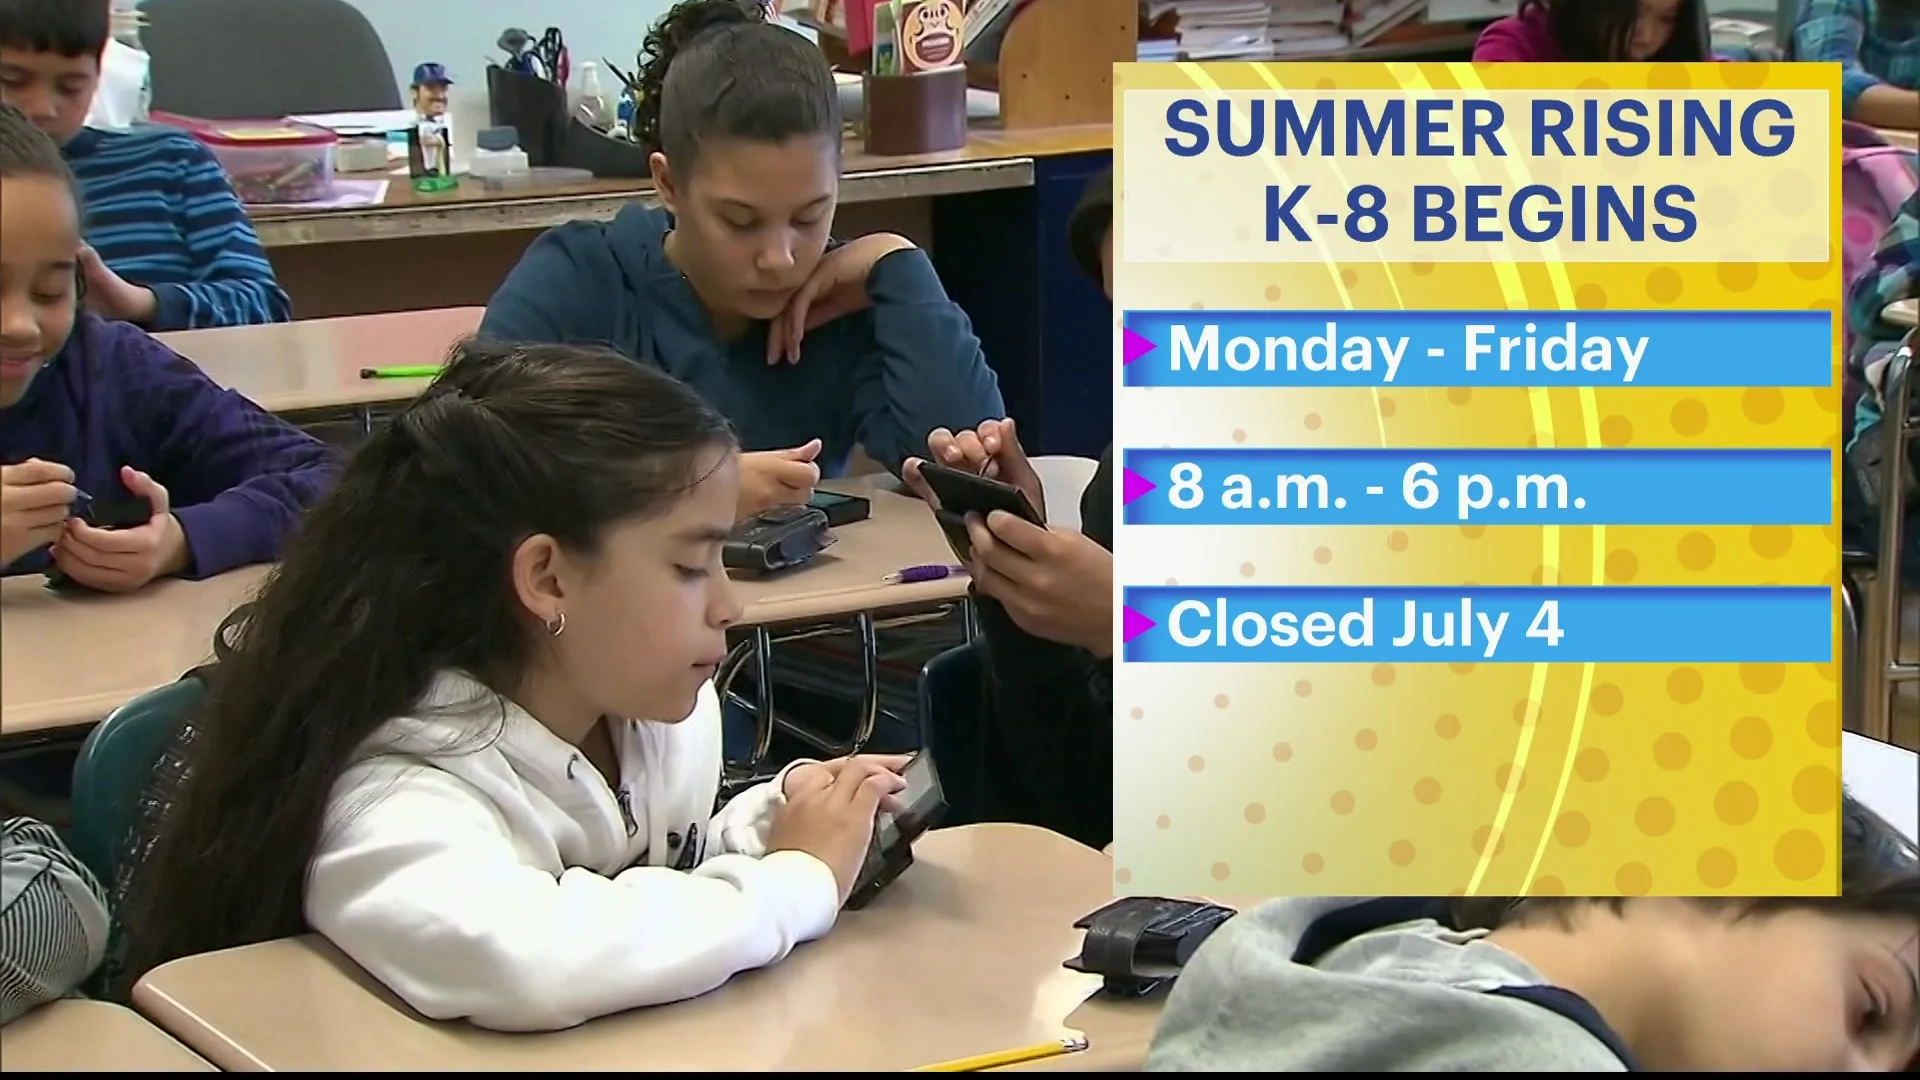 Did your child miss Summer Rising enrollment? You may still be able to grab a spot.